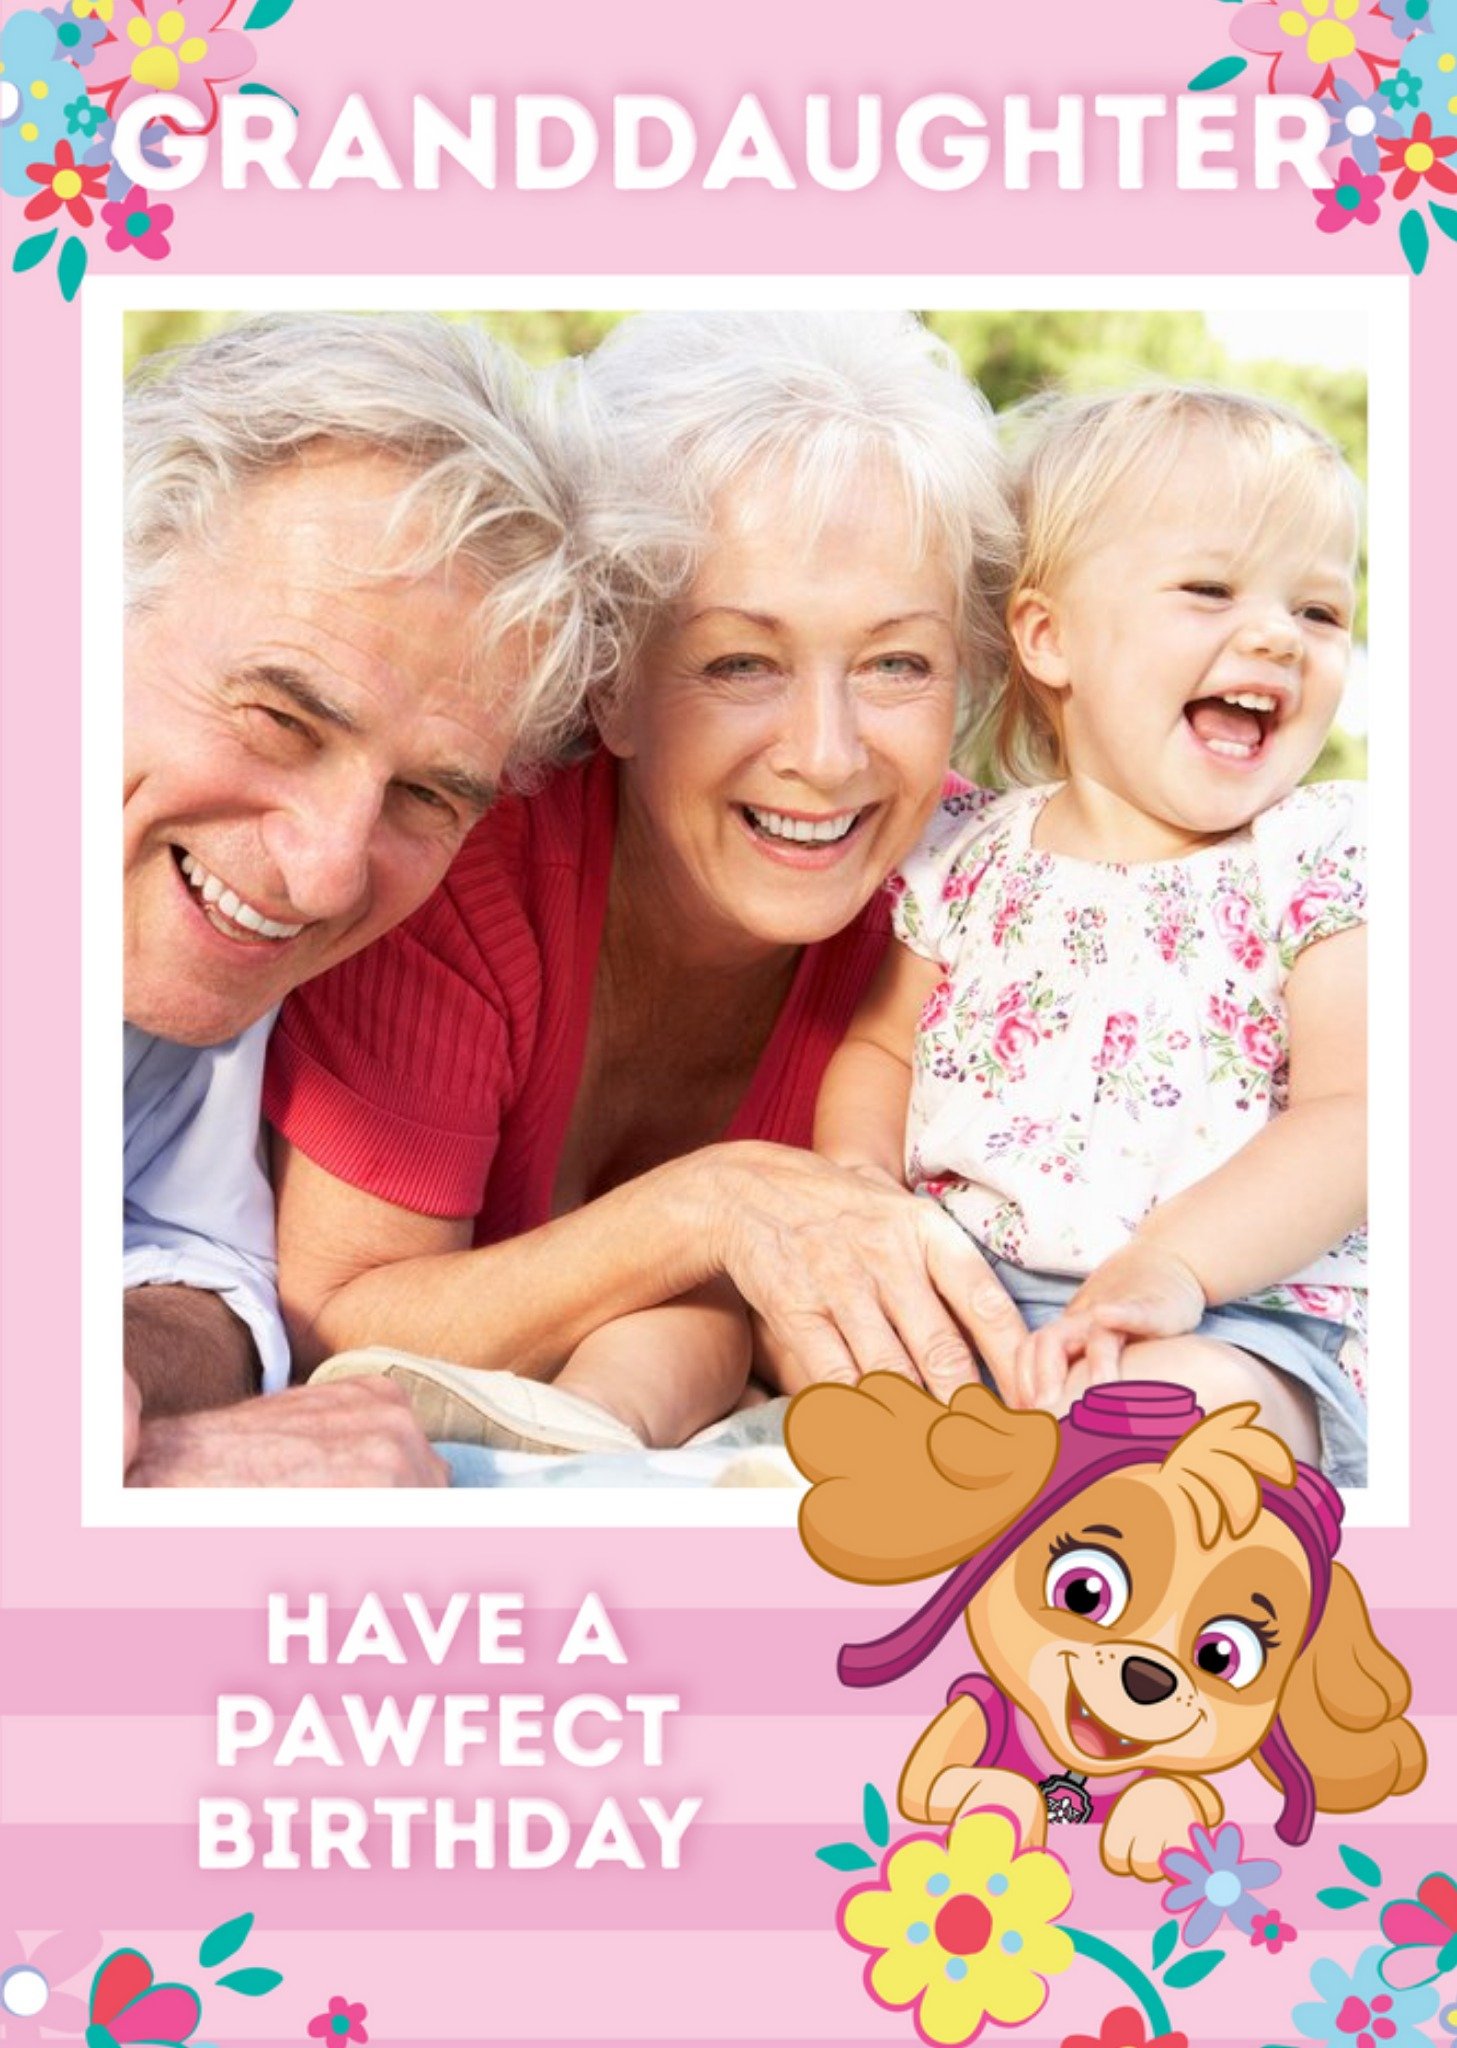 Paw Patrol Have A Pawfect Birthday Photo Upload Birthday Card For Granddaughter Ecard